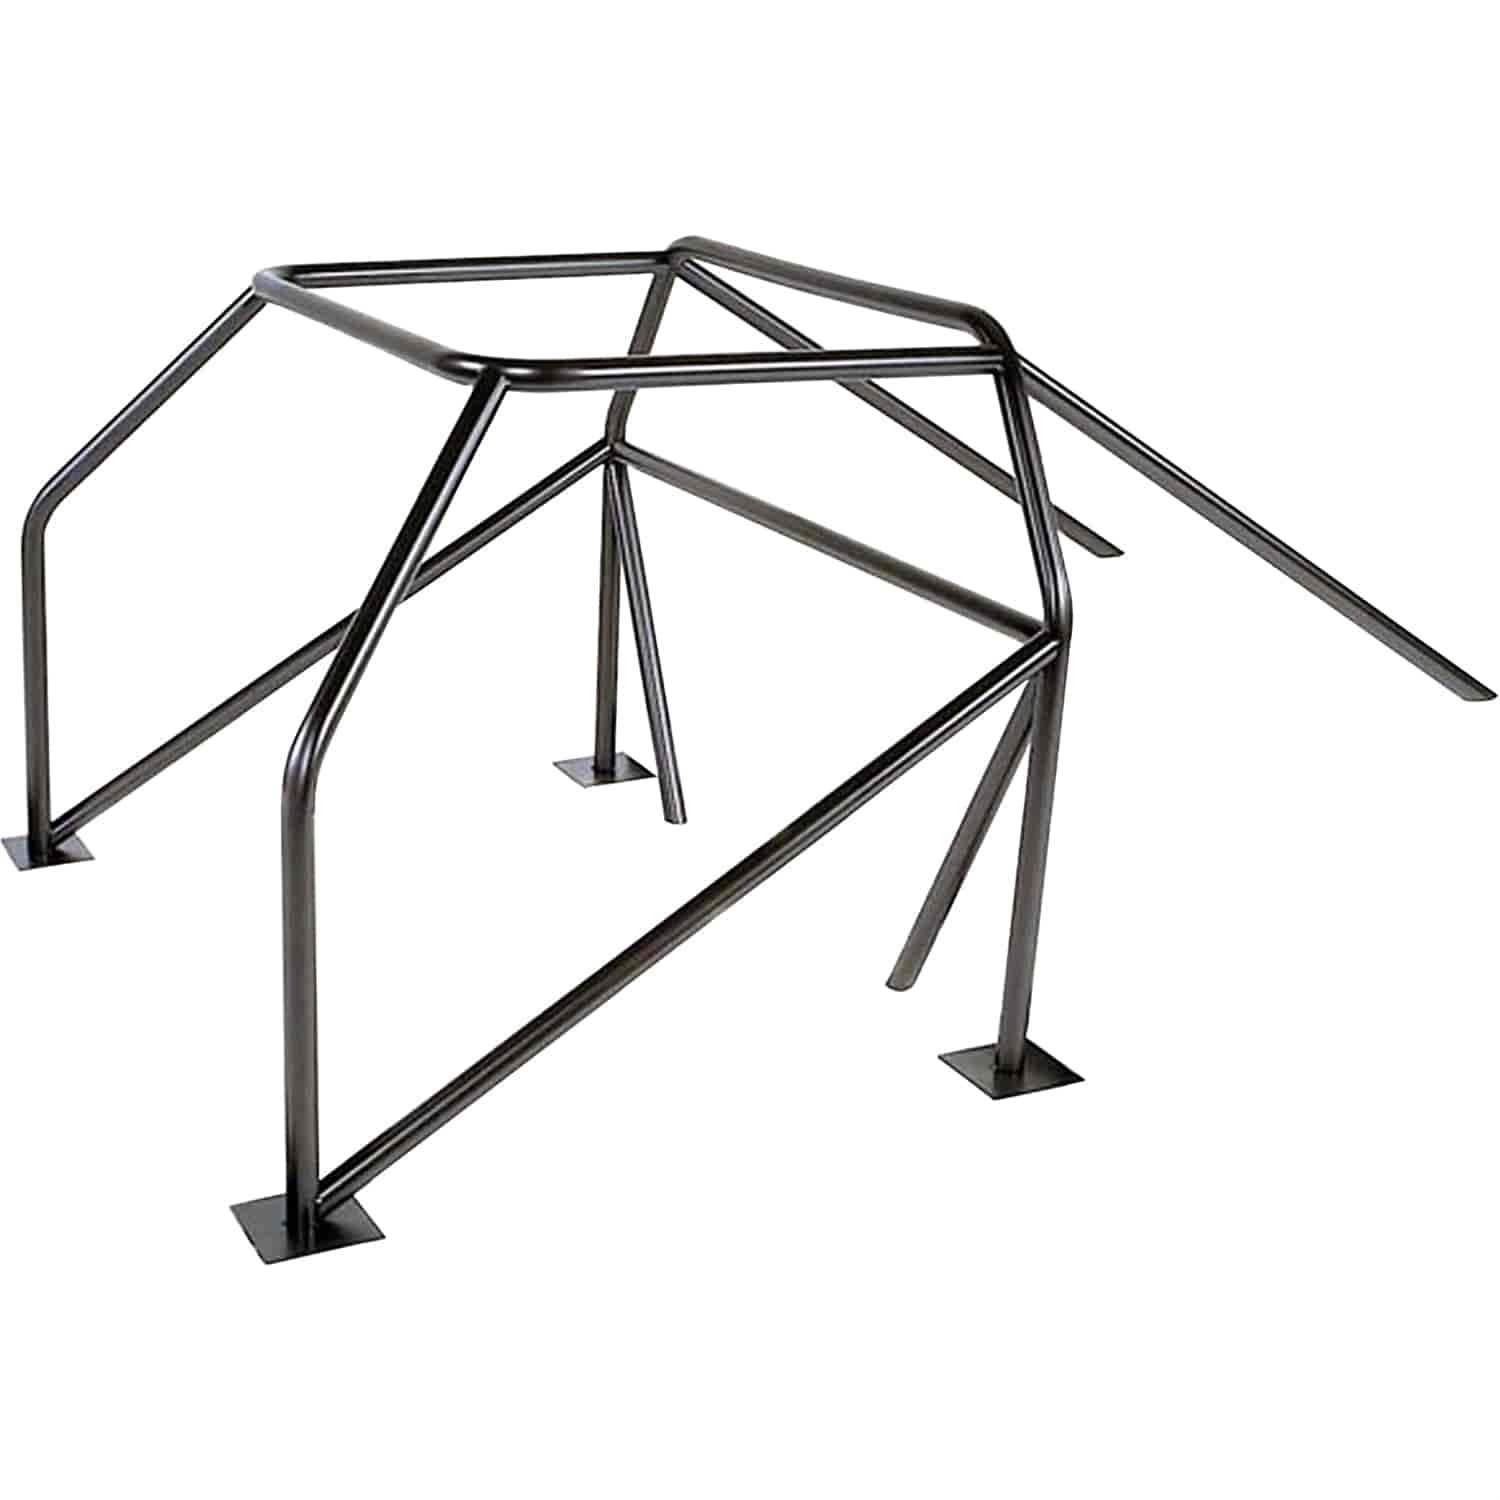 Complete 10-Point Roll Cage Kit 2008-Up Challenger - Chrome Moly